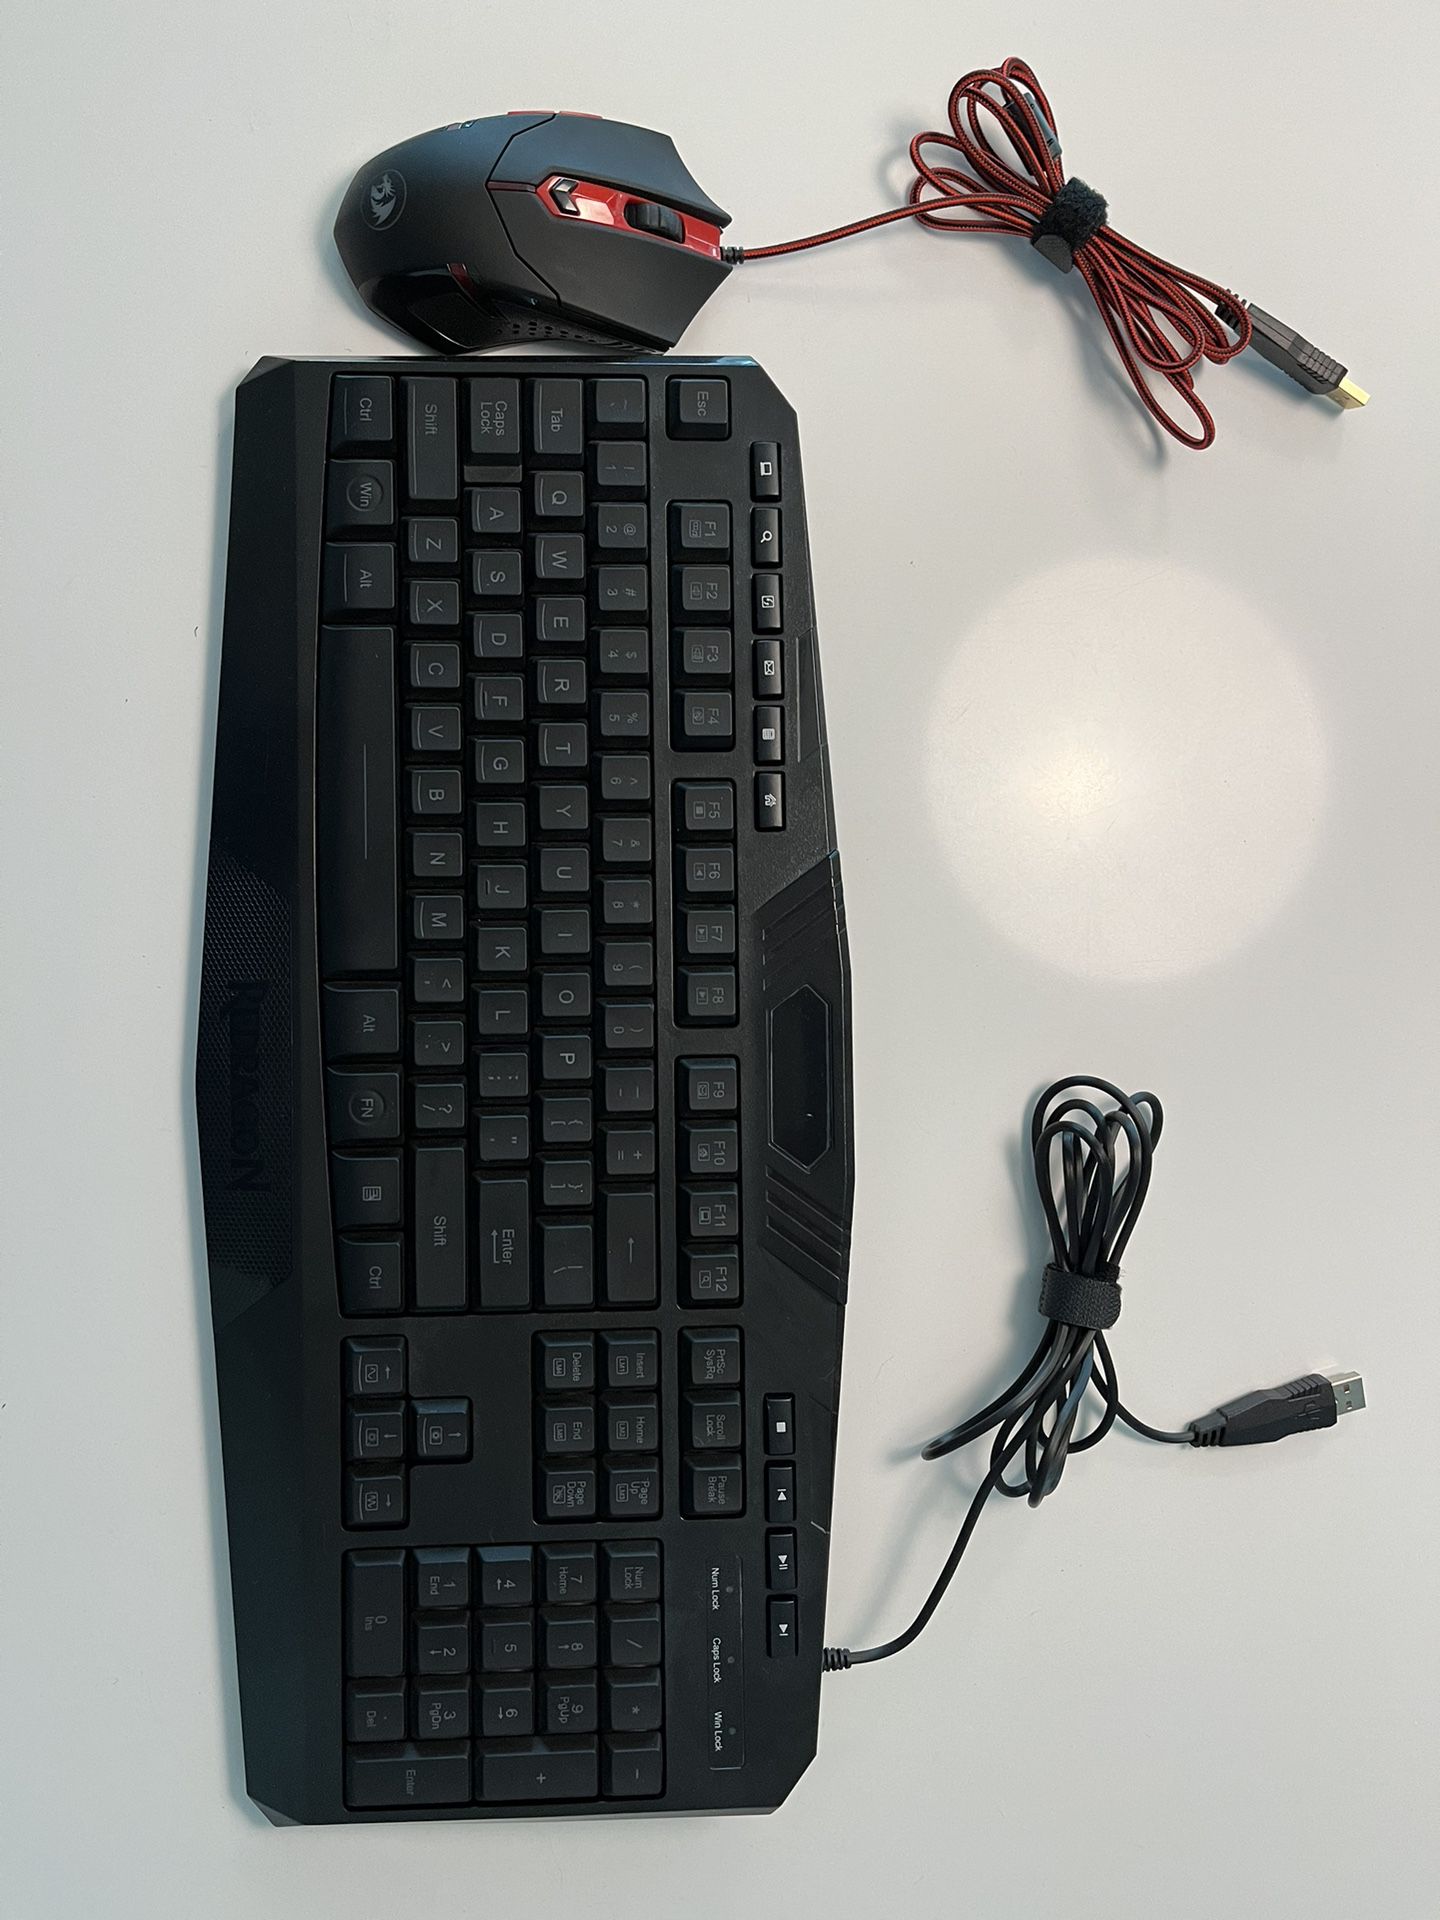 REDRAGON Keyboard and Mouse